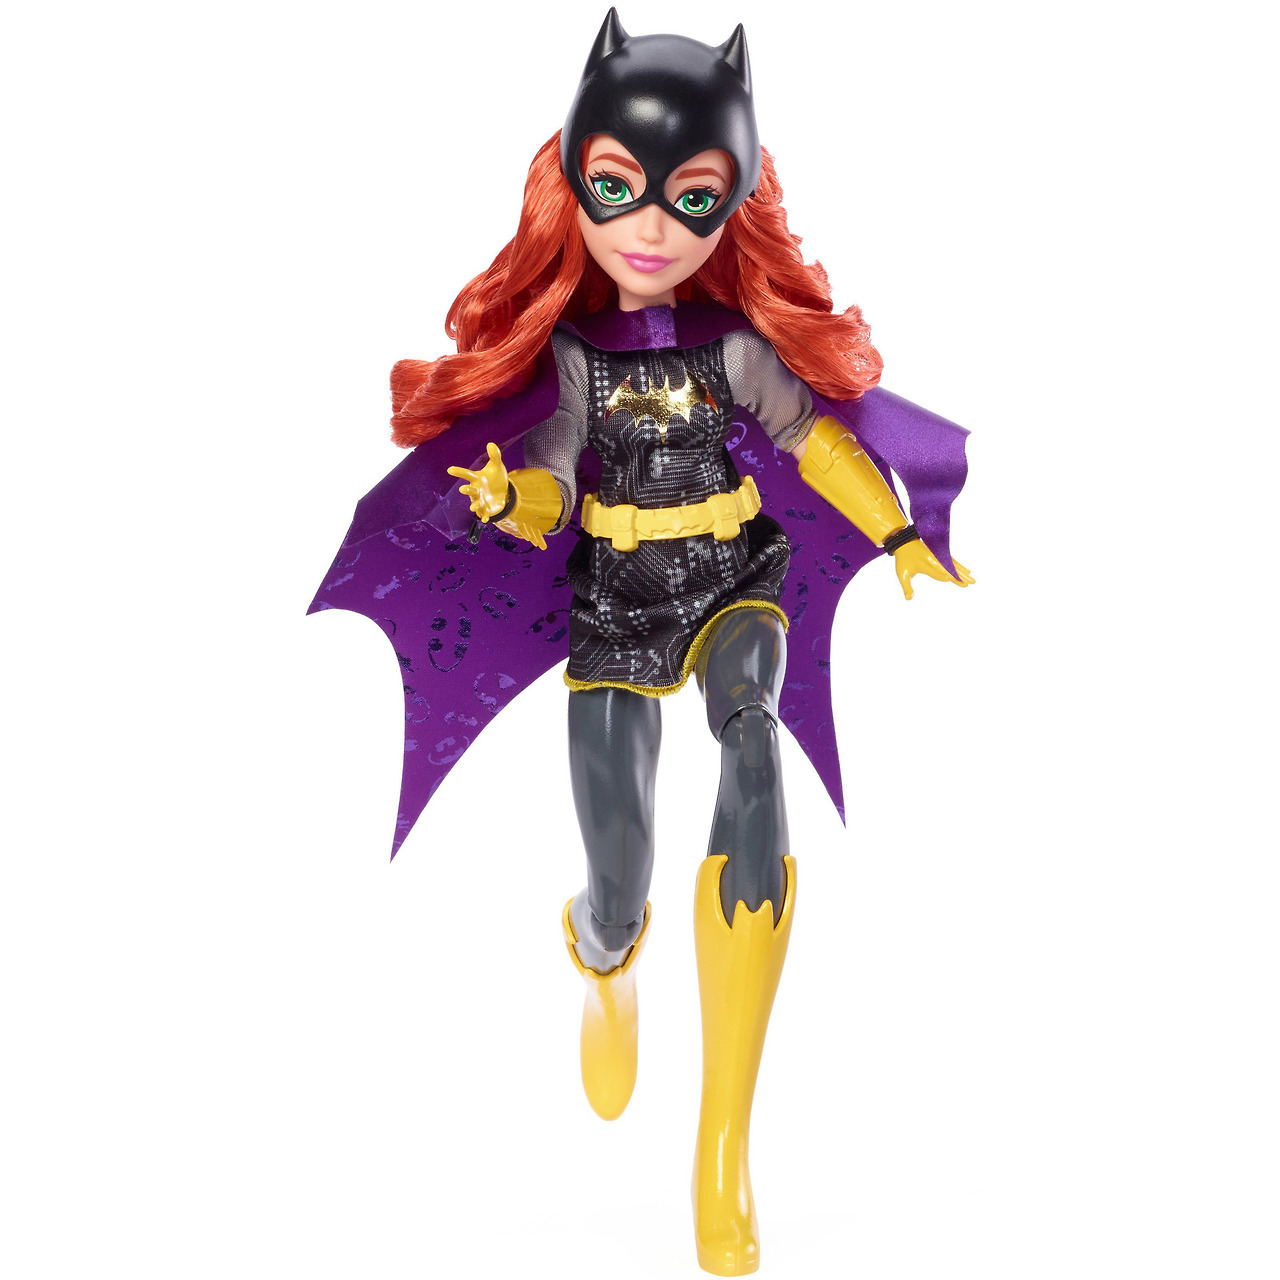 There Is Always Room For Batgirl.